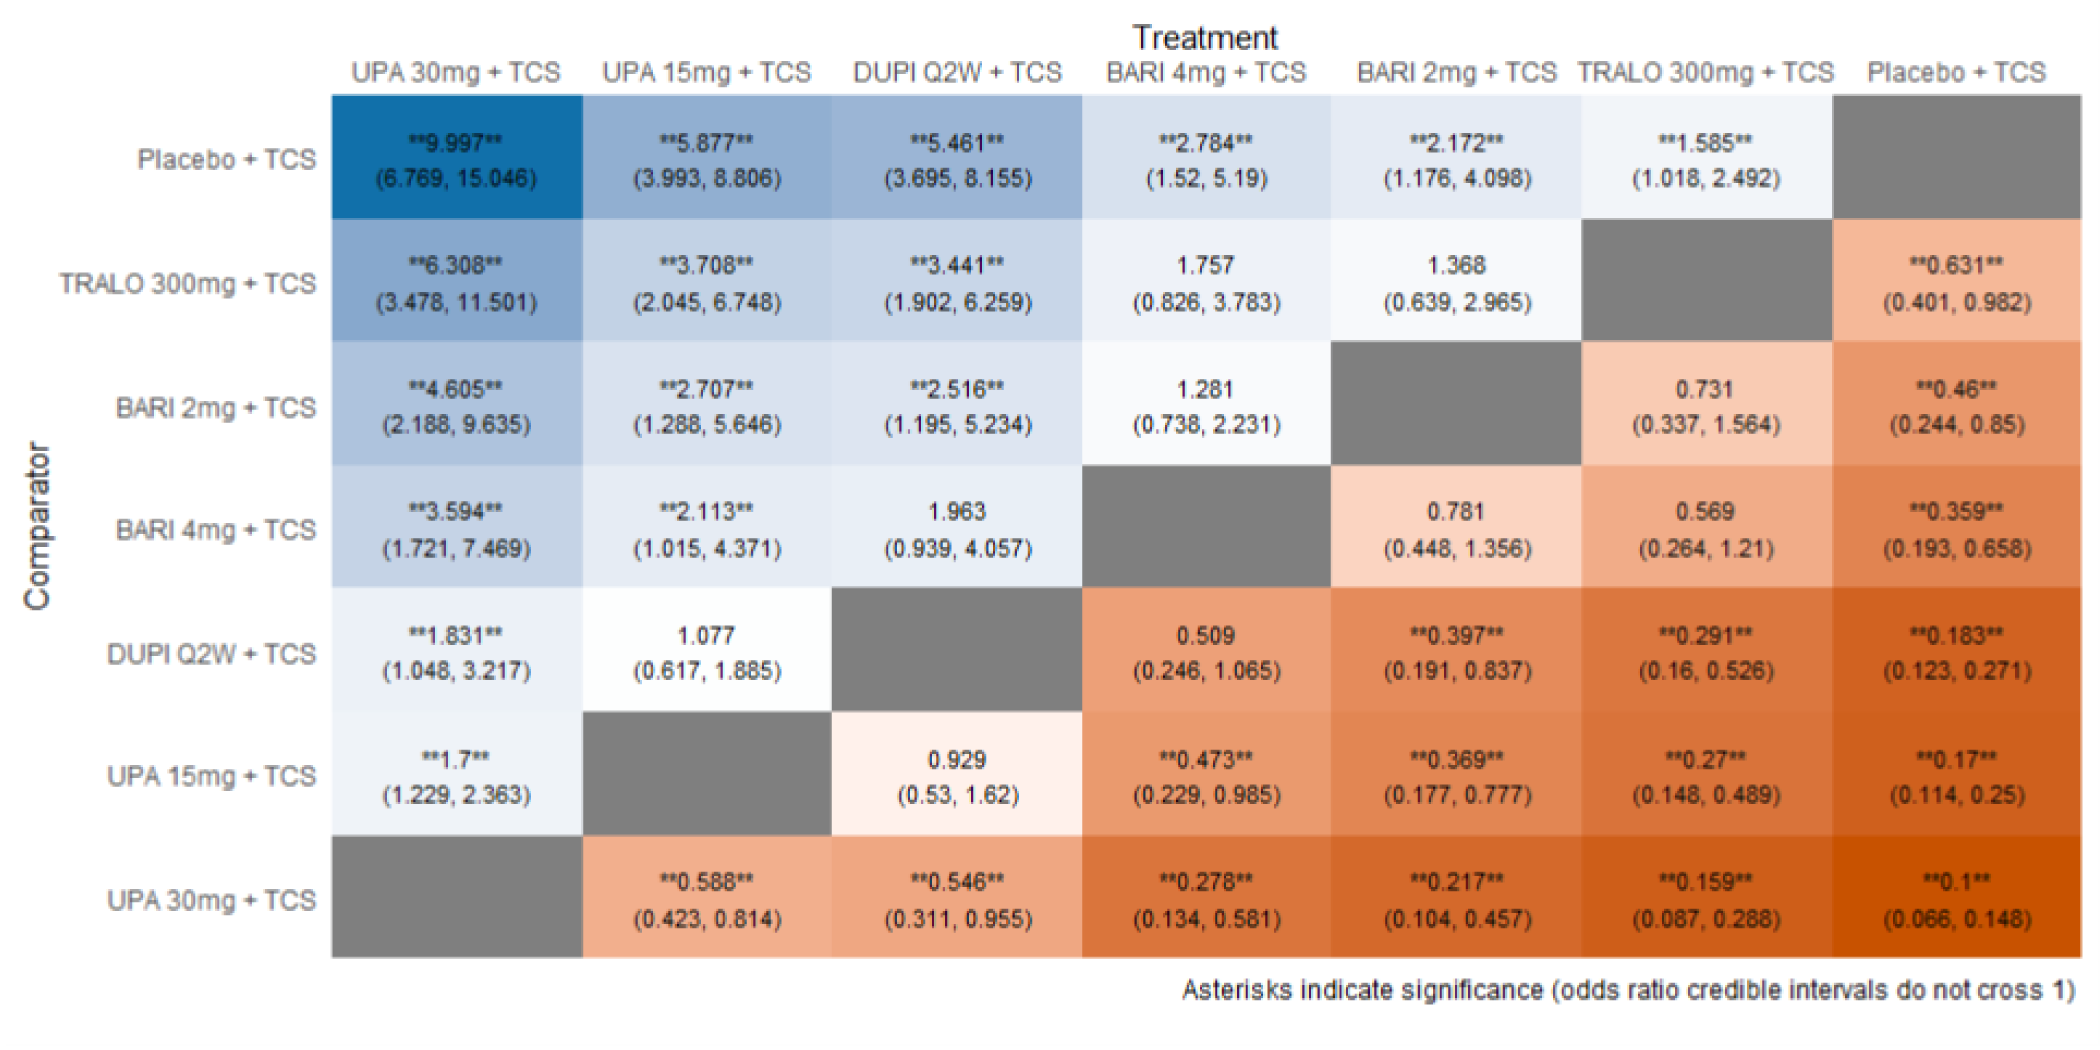 Figure depicts the league table of randomized controlled trials, including baricitinib 2 mg, baricitinib 4 mg, upadacitinib 30 mg, upadacitinib 15 mg, tralokinumab, and dupilumab, each with added topical corticosteroids, and placebo.